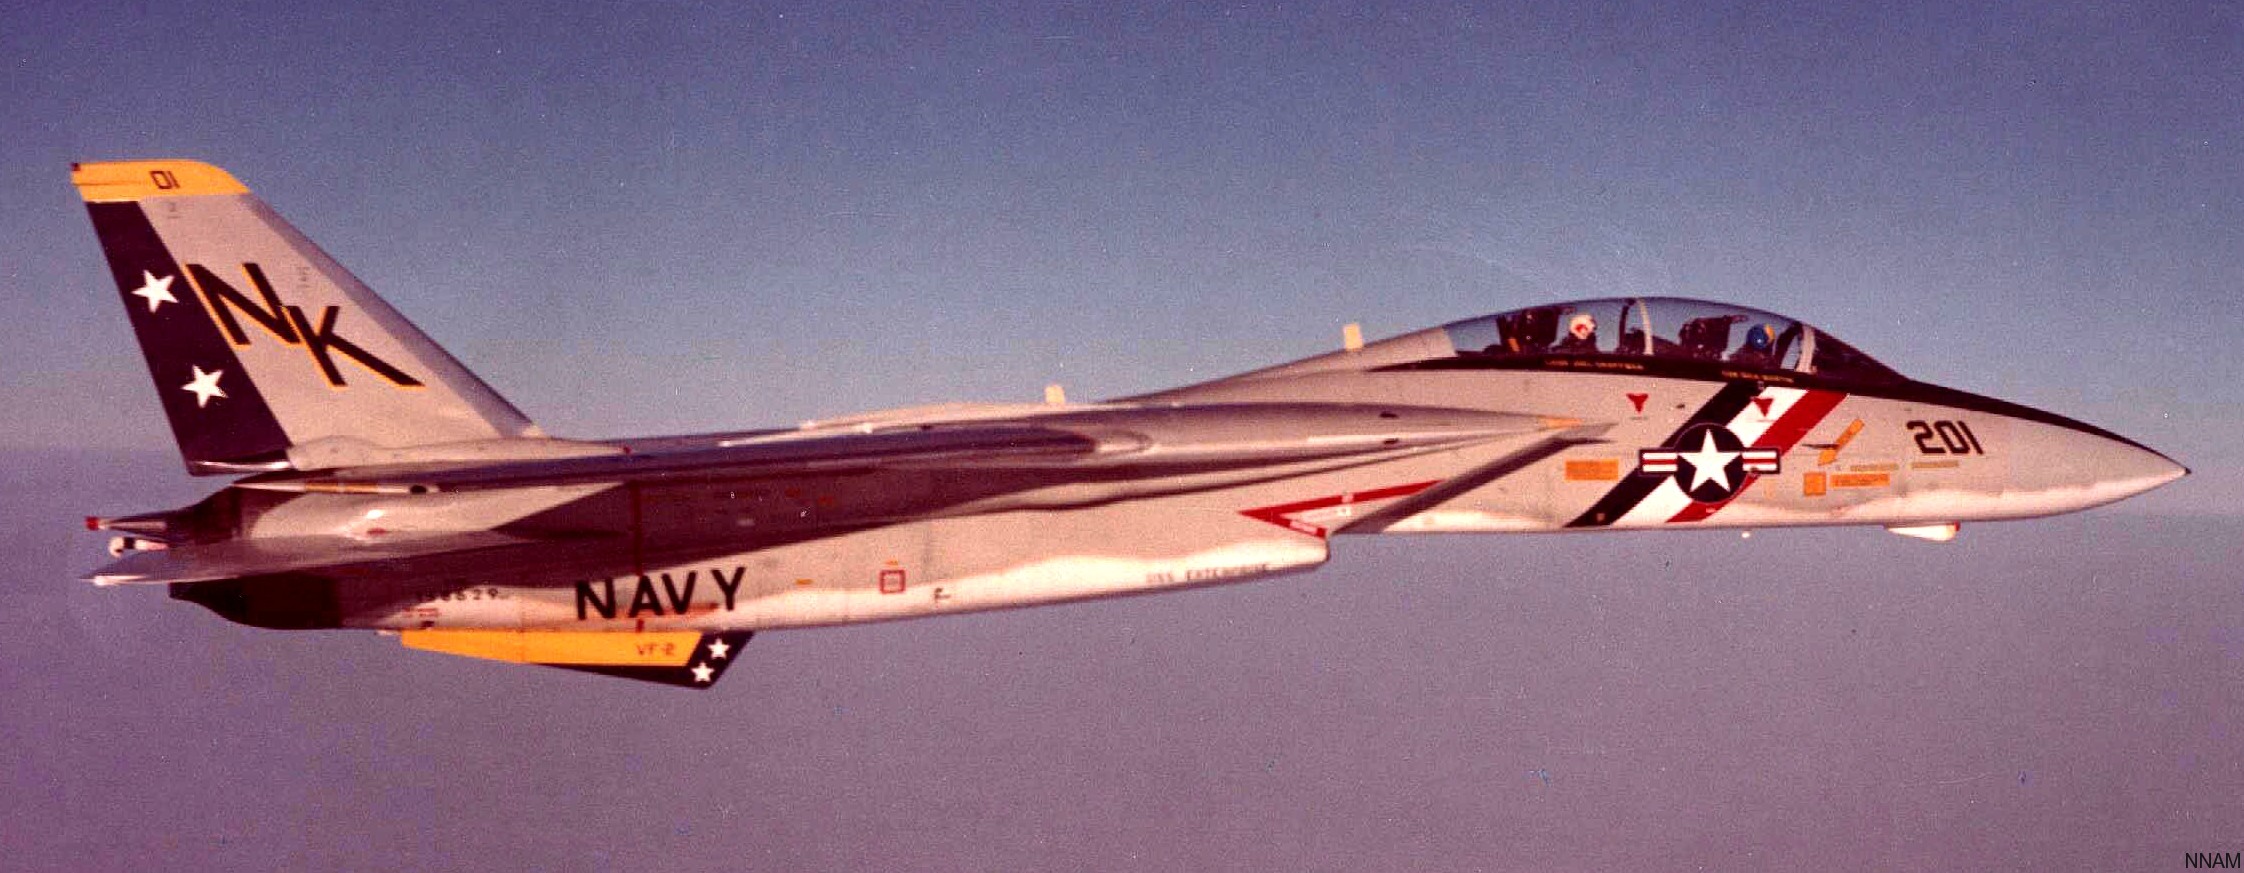 vf-2 bounty hunters fighter squadron fitron f-14a tomcat carrier air wing cvw-14 09